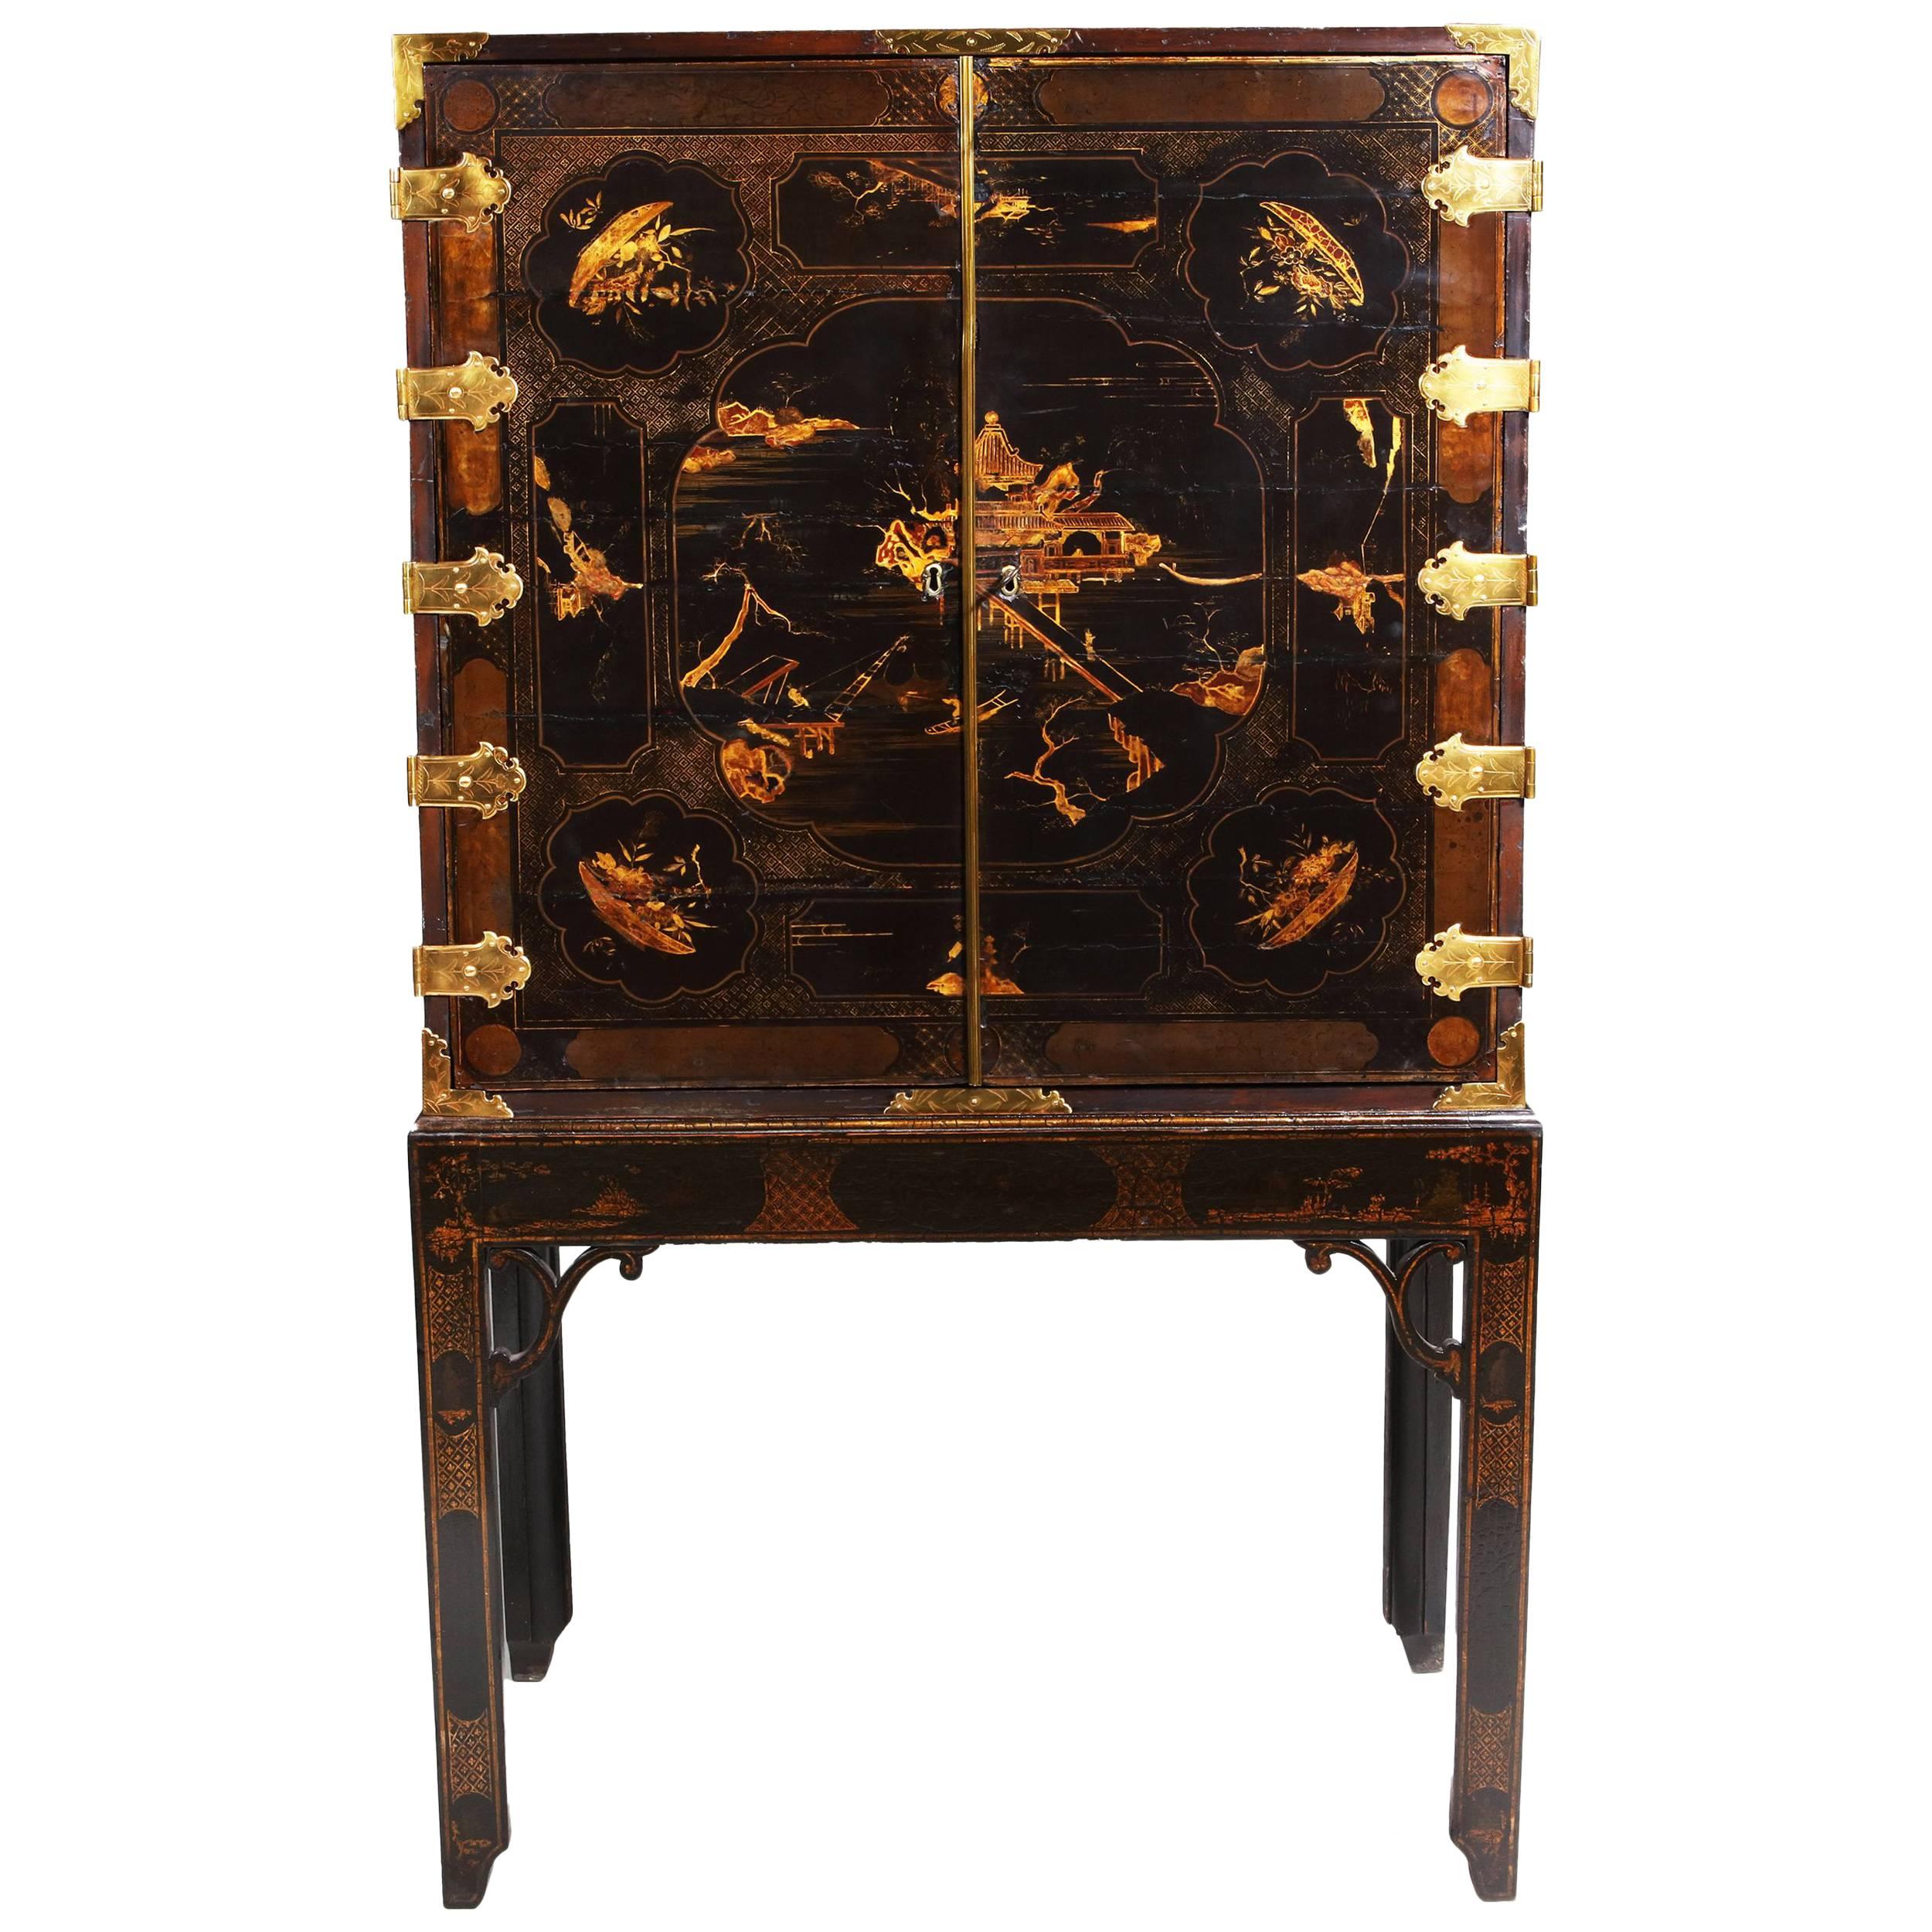 George III Black Japanned Lacquer Cabinet on Stand